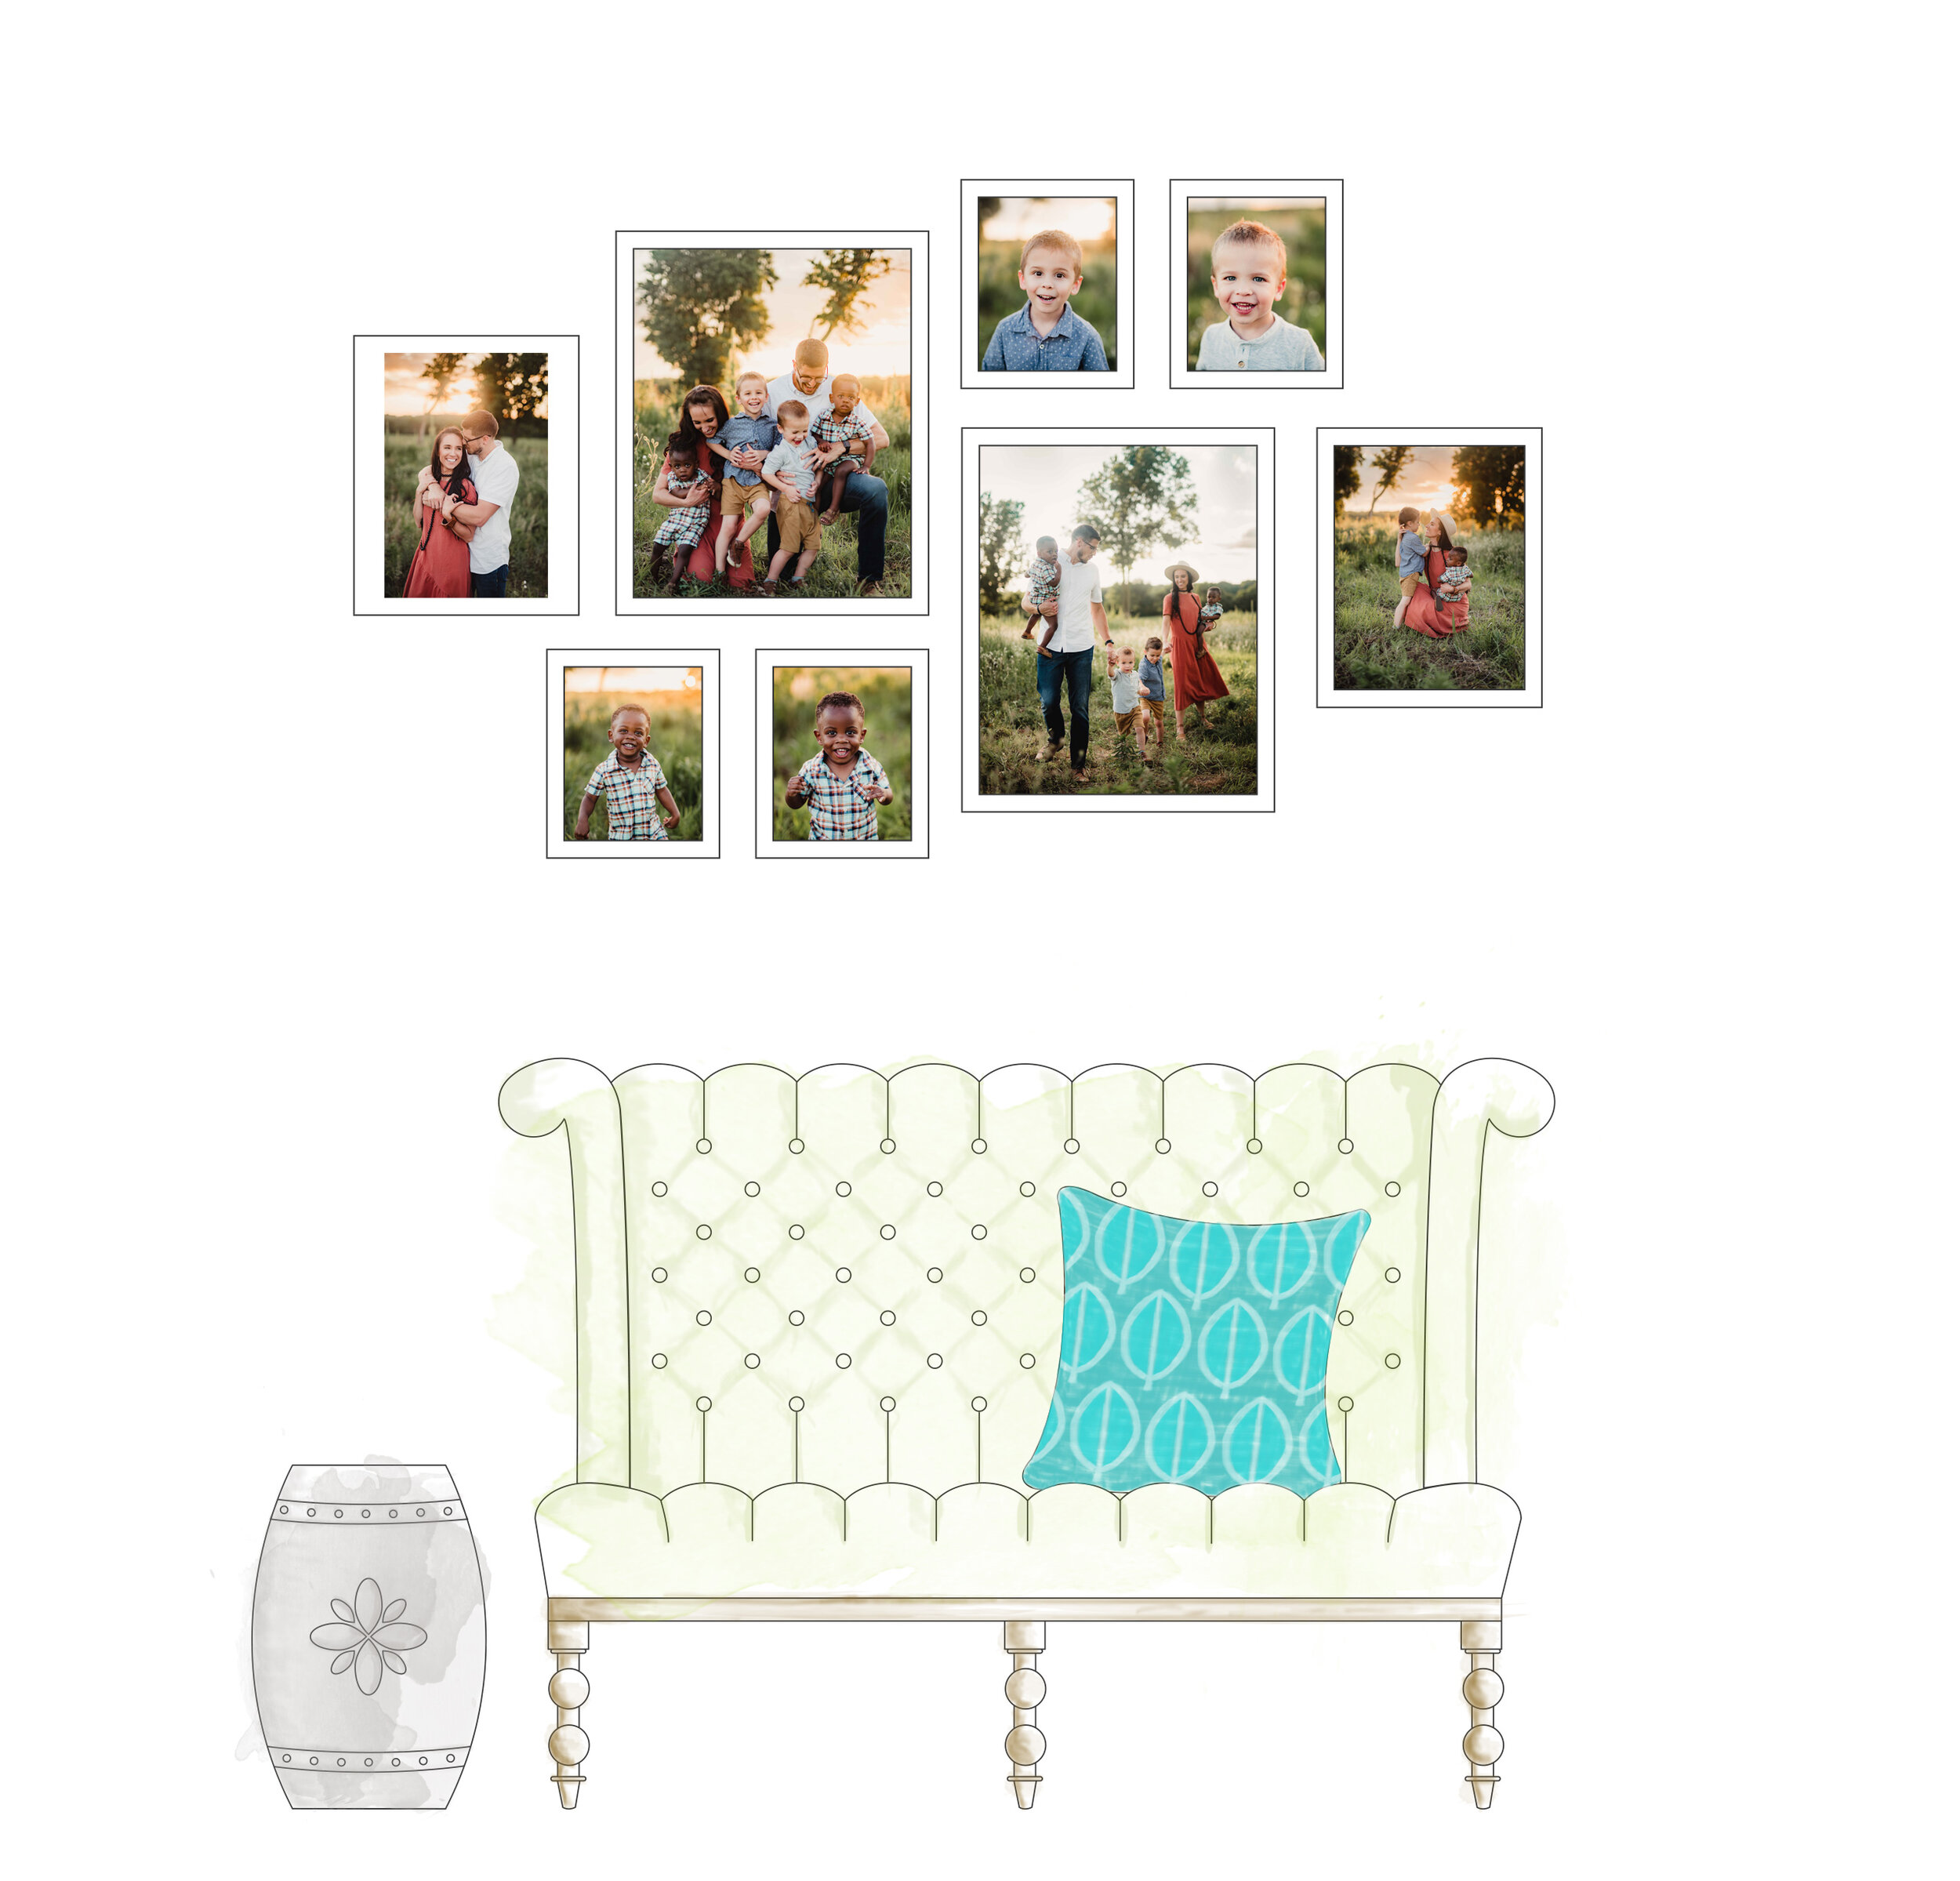 A gallery wall is a great way to display multiple photos from one session or choose your favorites from over the years. You can also easily switch out photos after you’ve had new family pictures taken.